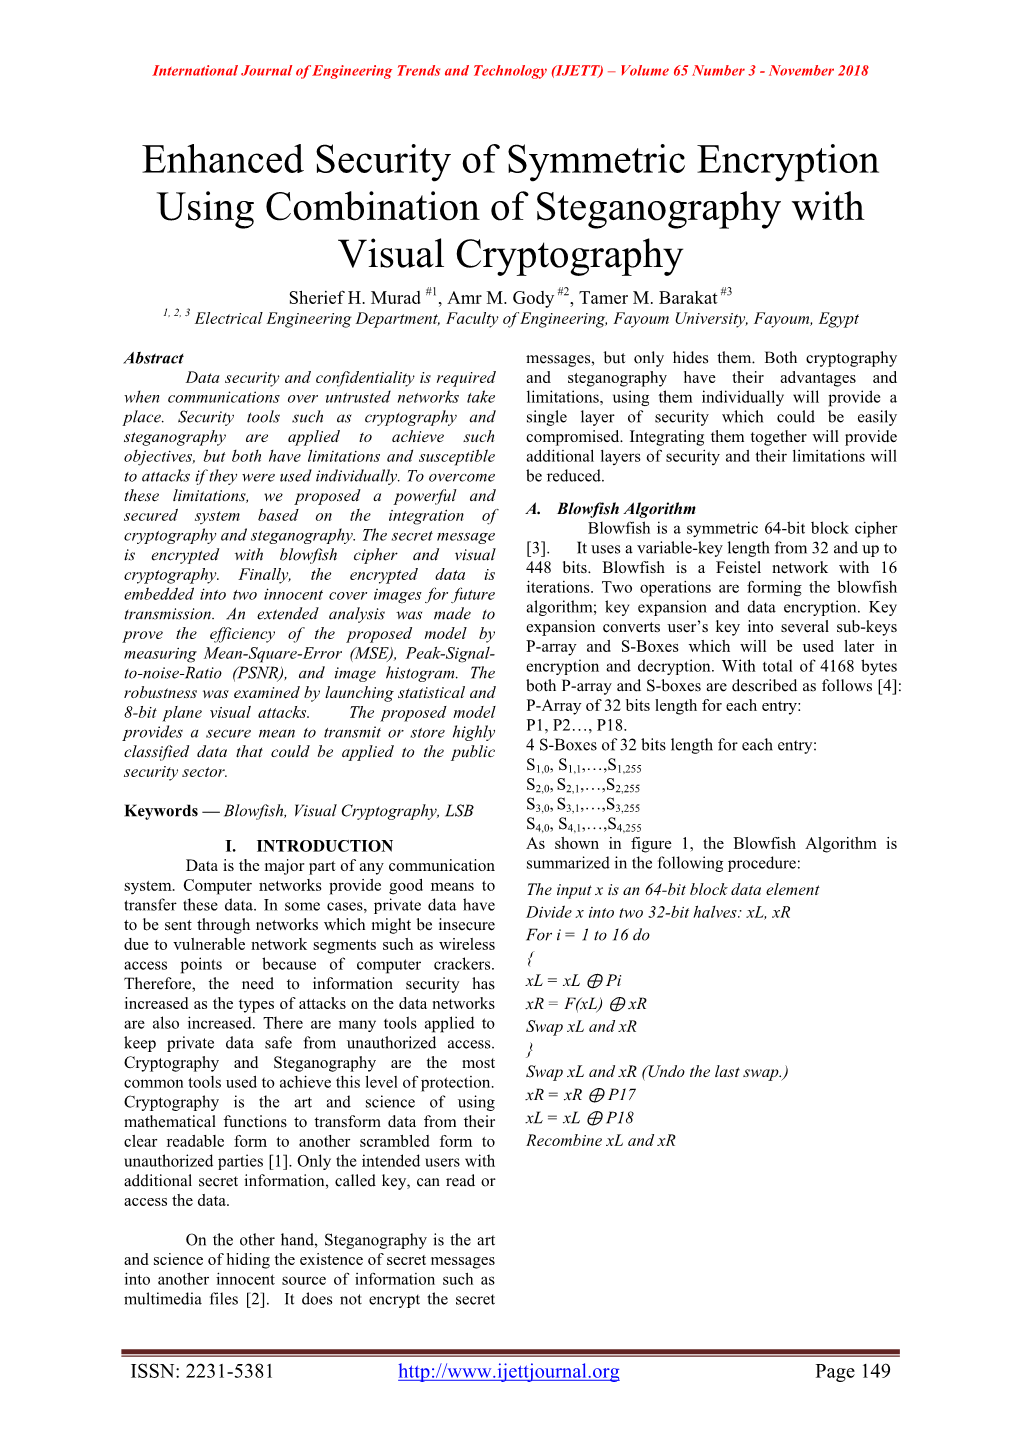 Enhanced Security of Symmetric Encryption Using Combination of Steganography with Visual Cryptography Sherief H